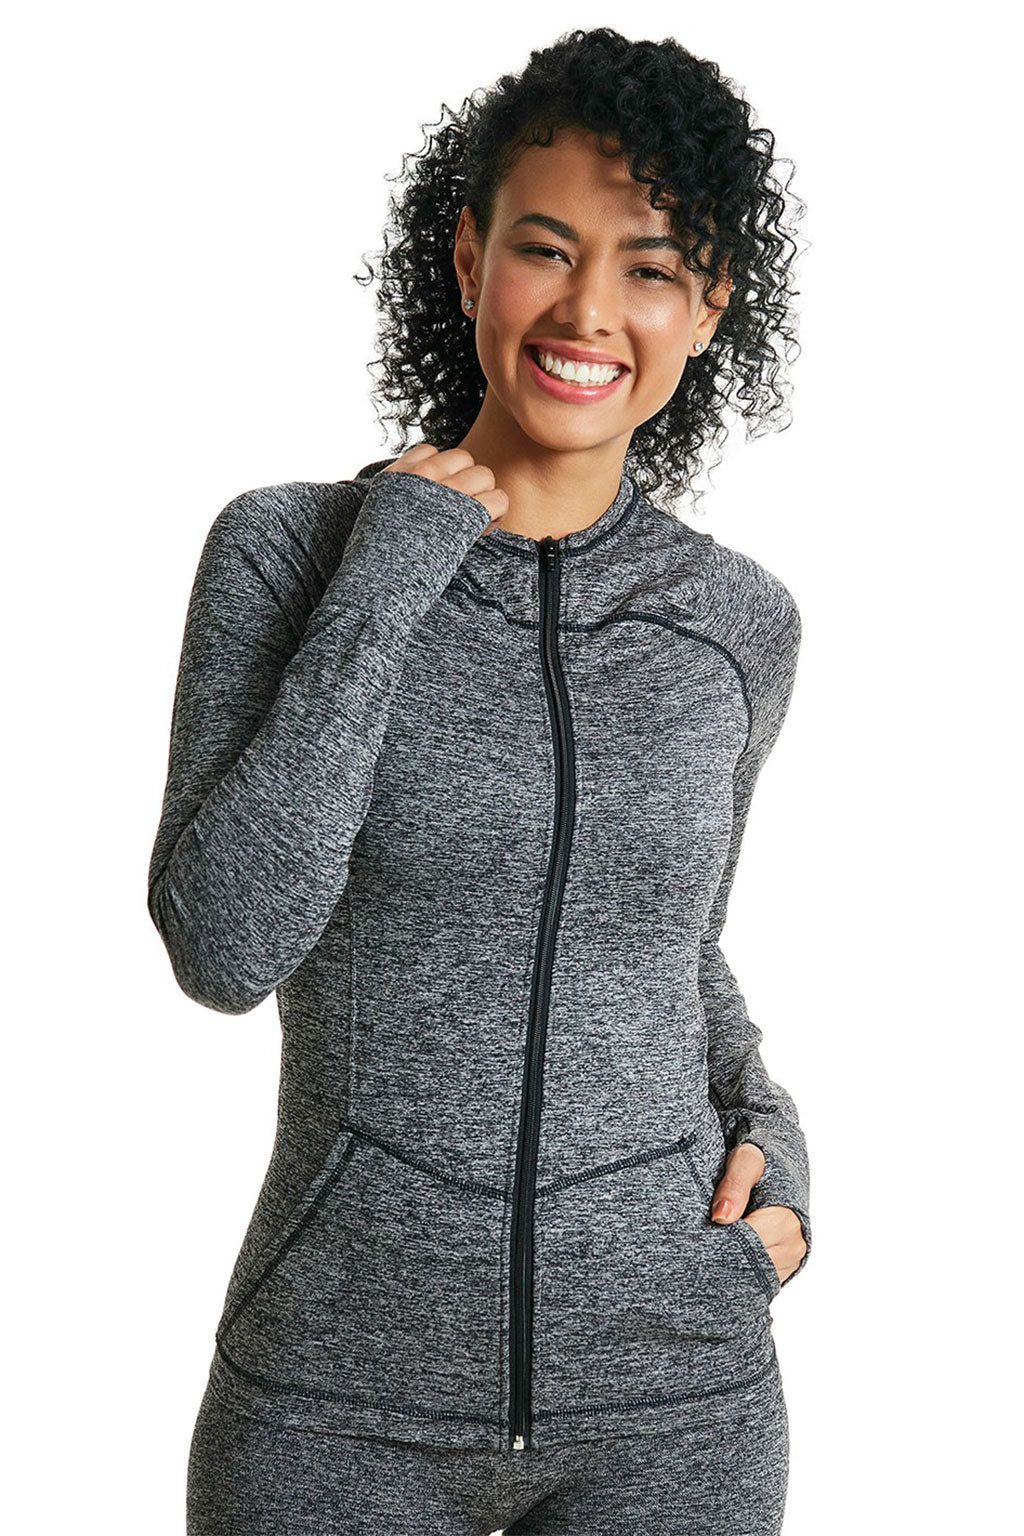 FITNESS Hooded Sport Jacket with zipper closure